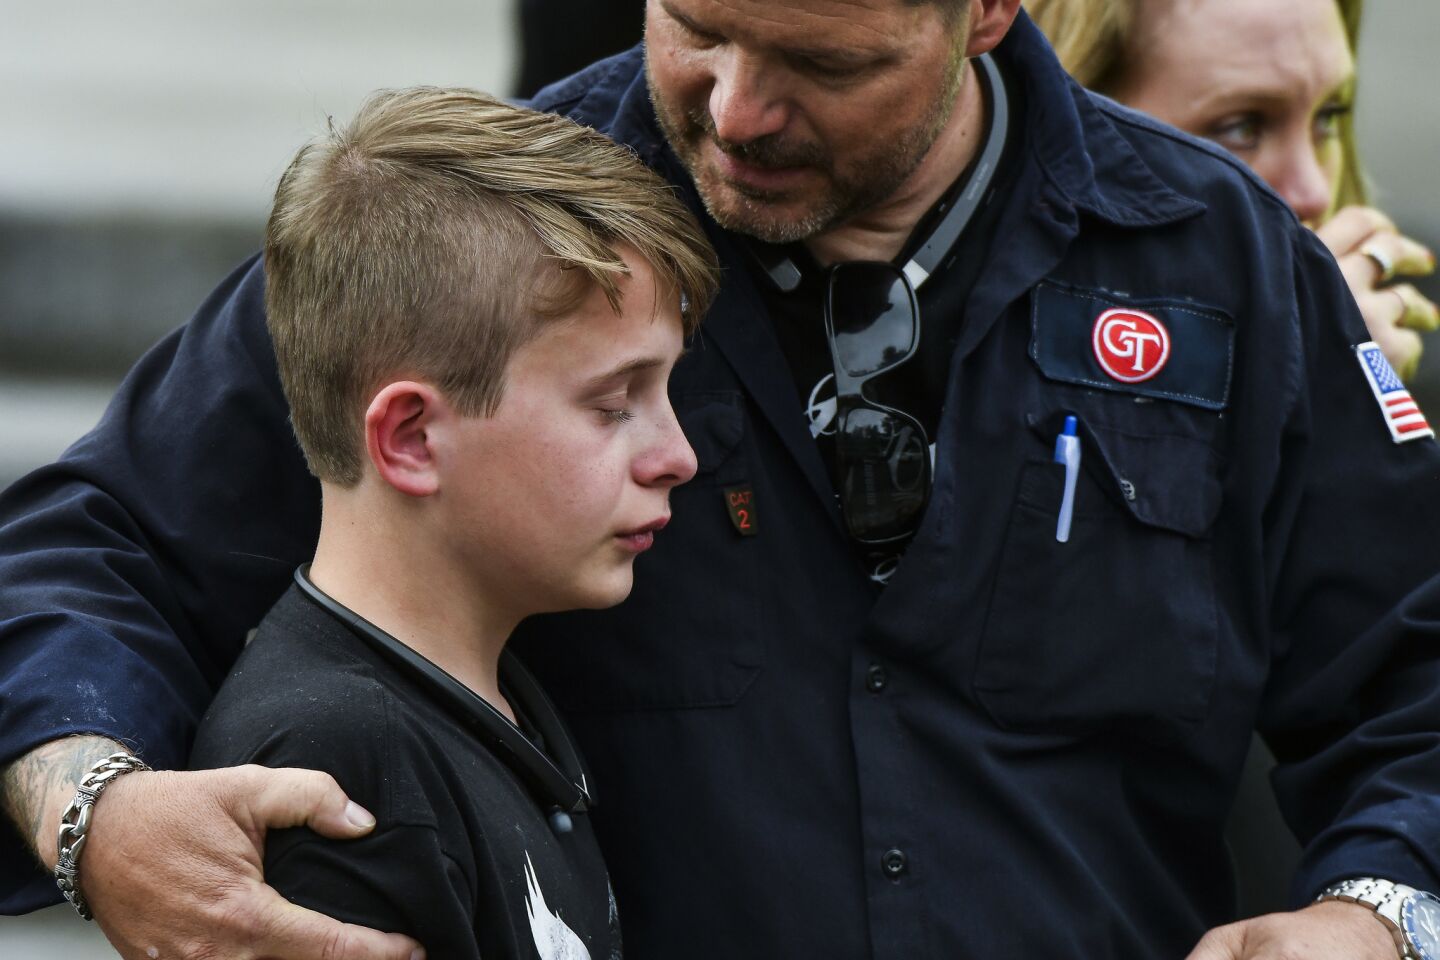 Students are reunited with their parents after being evacuated to the Recreation Center at Northridge after a shooting at STEM School Highlands Ranch on May 7, 2019, in Highlands Ranch, Colo.